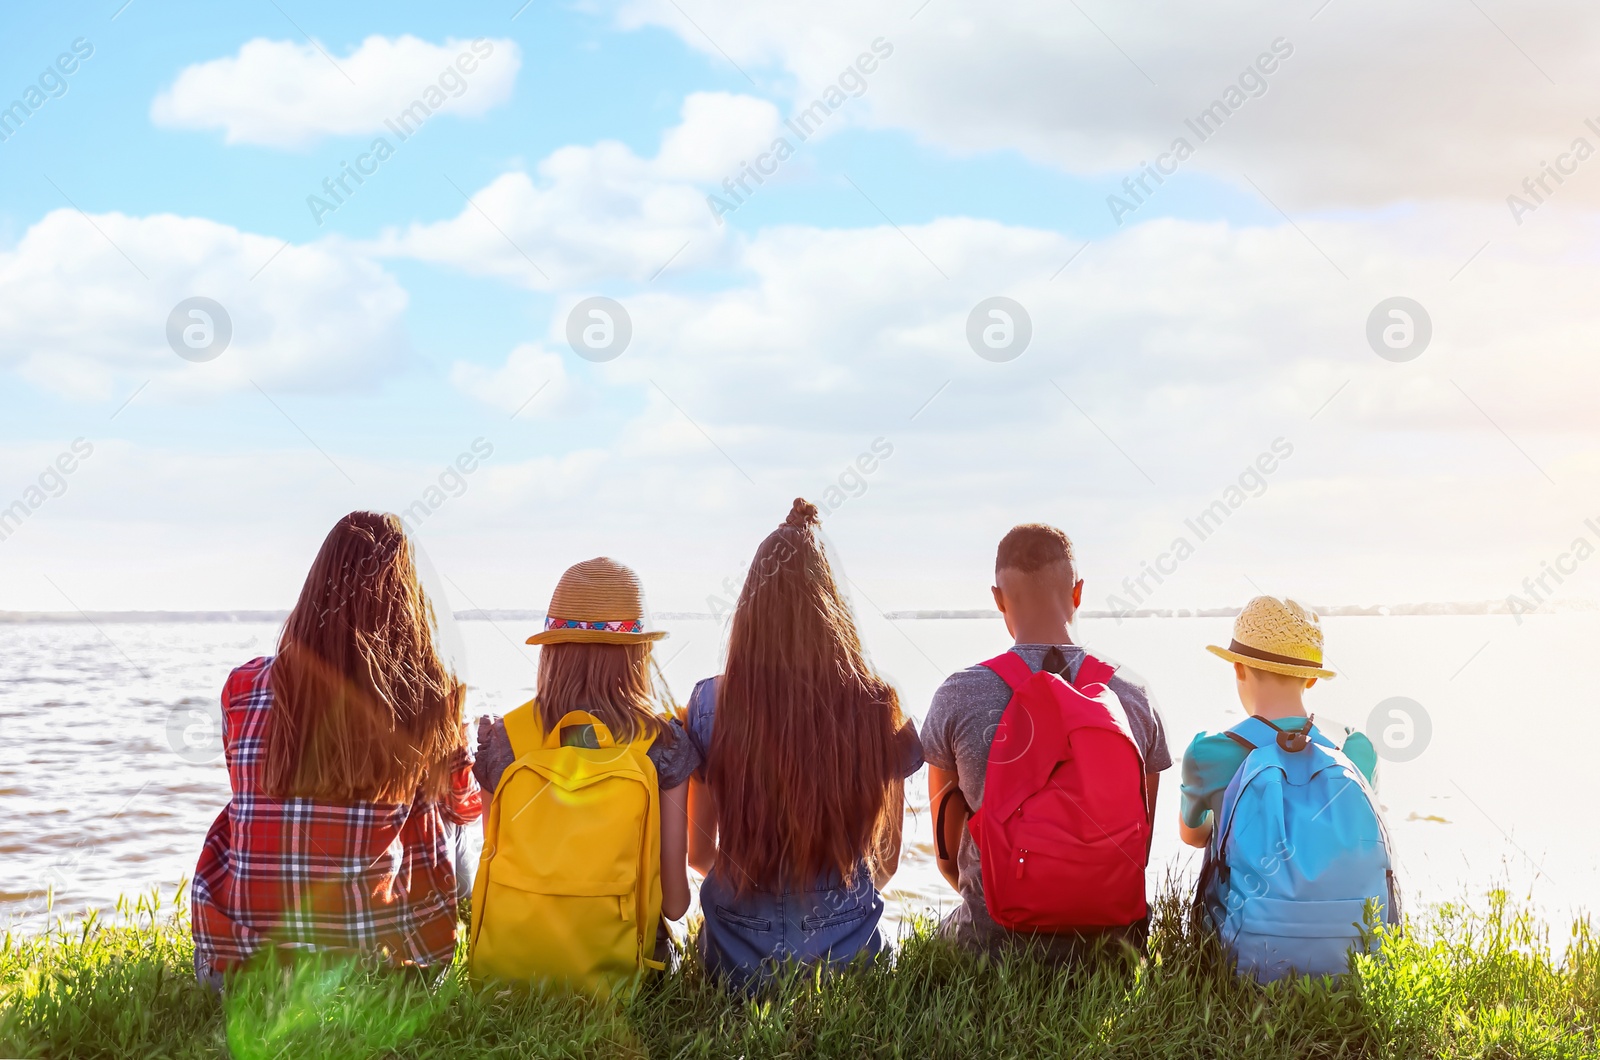 Image of School holidays. Group of children sitting on green grass near river 